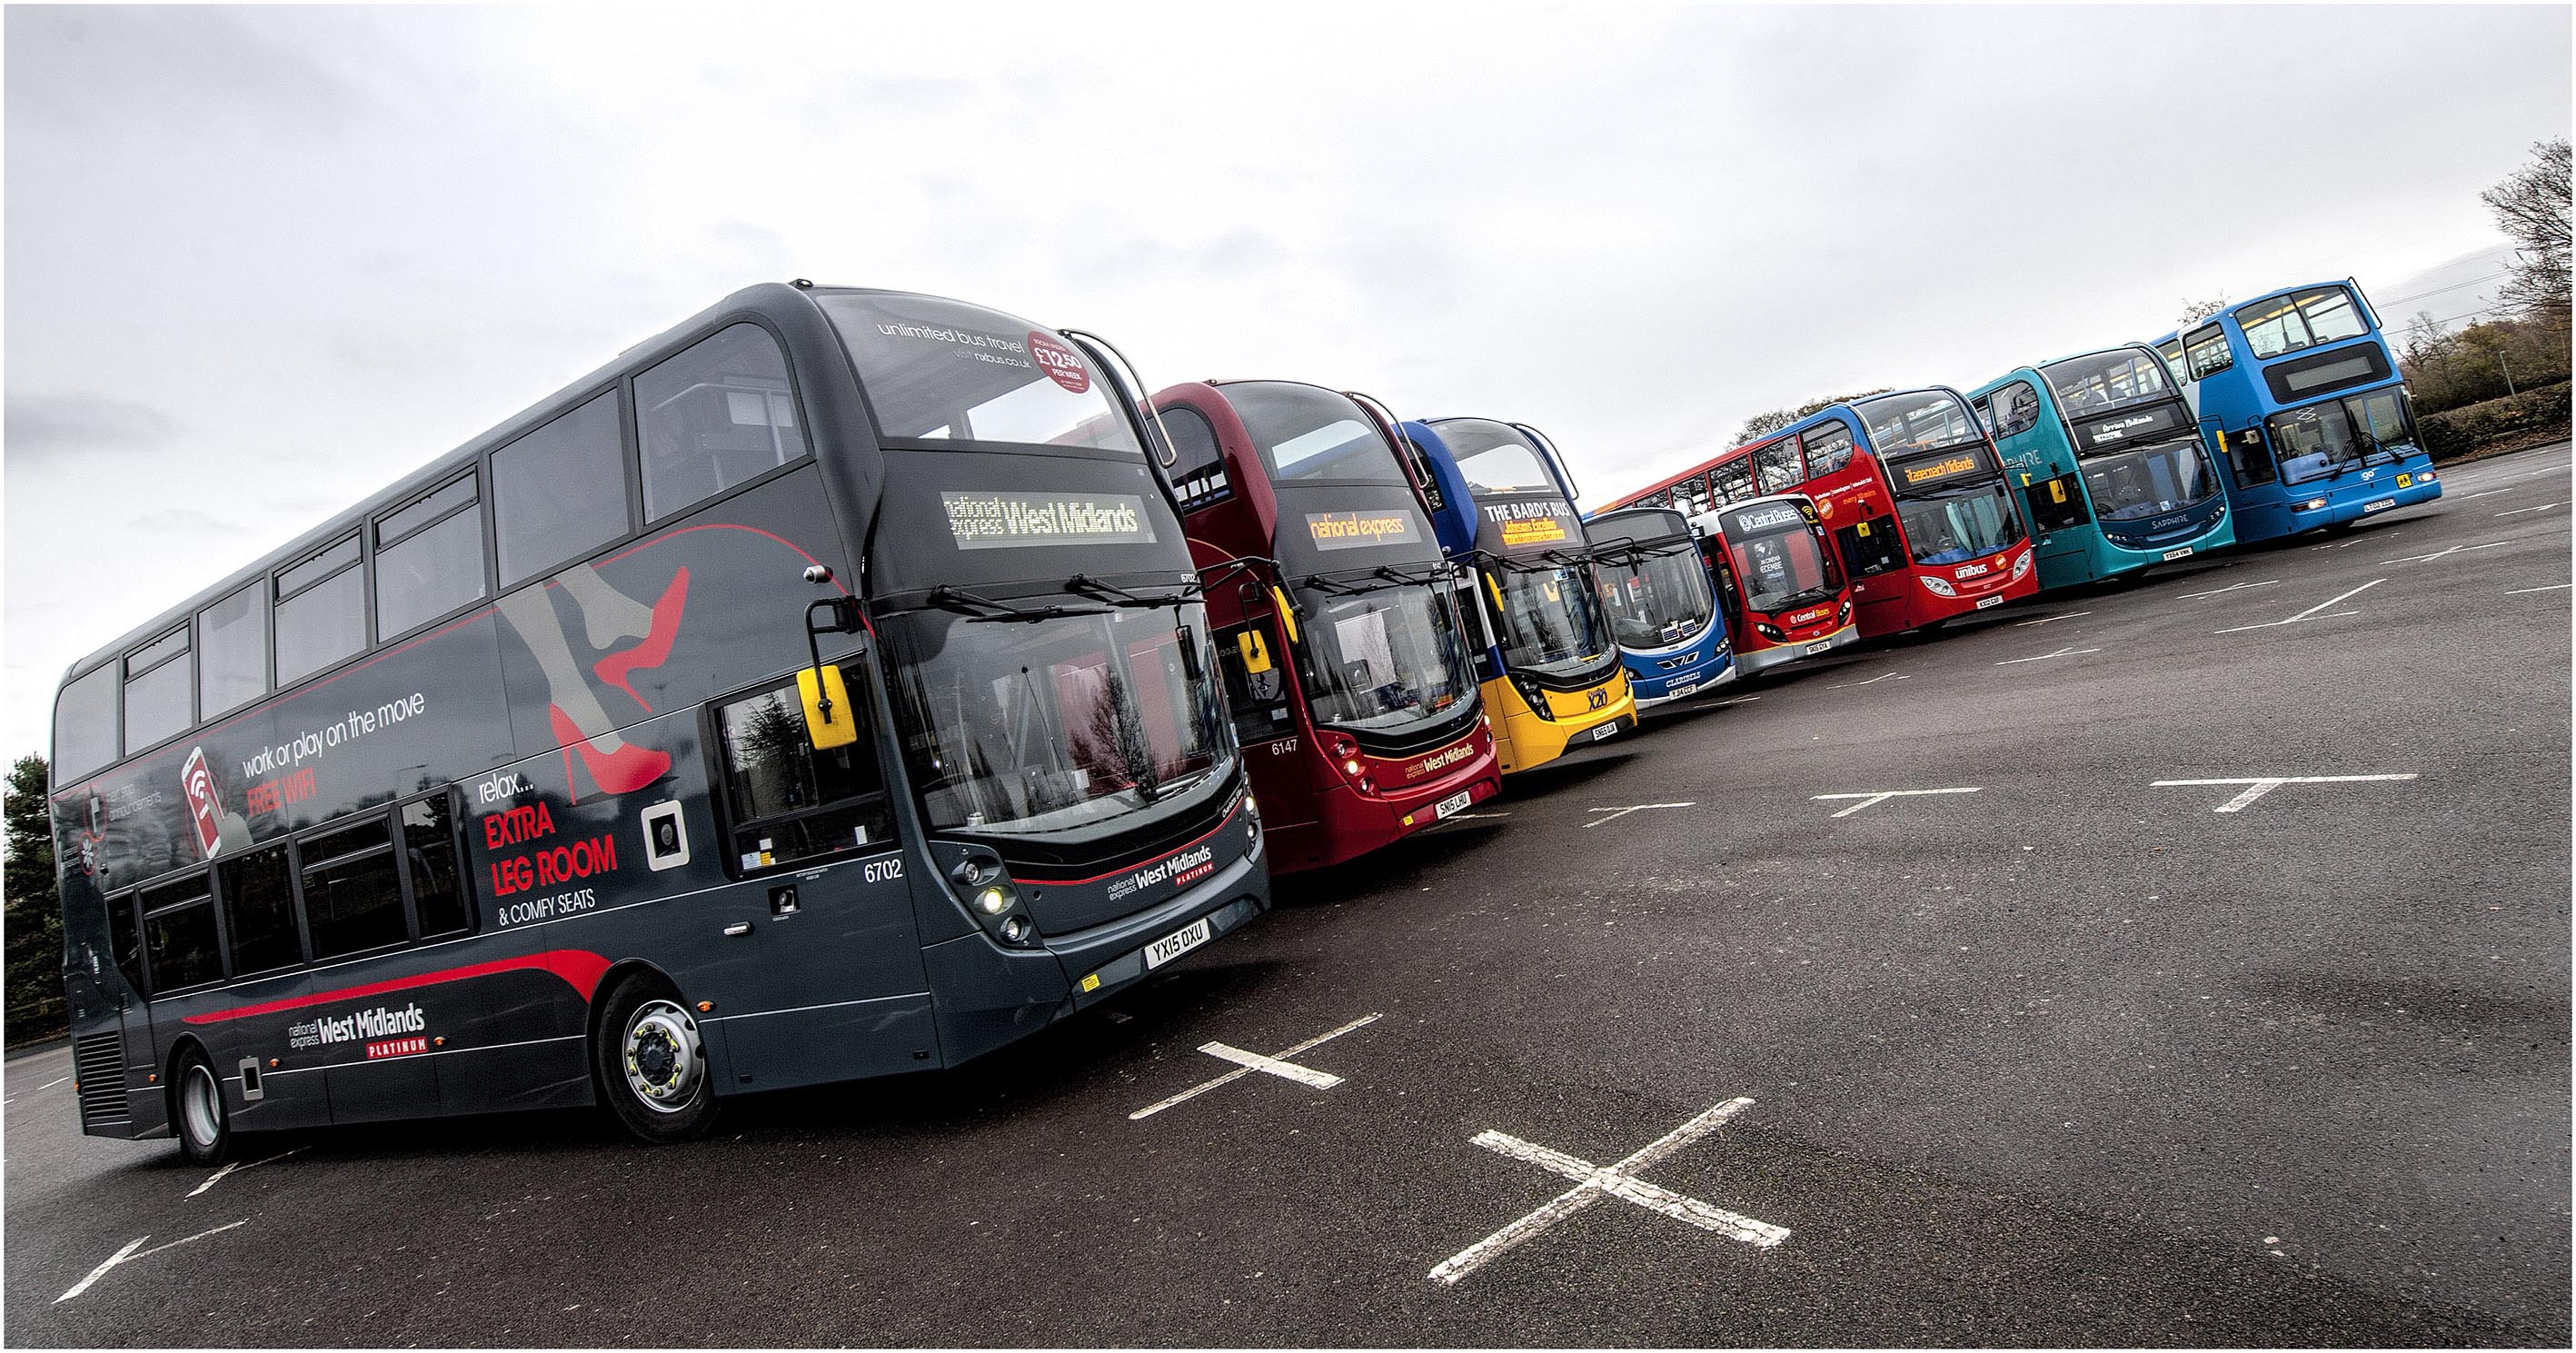 Proposals offering the West Midlands greater freedom to improve its local bus services have been welcomed by the region's transport chiefs.